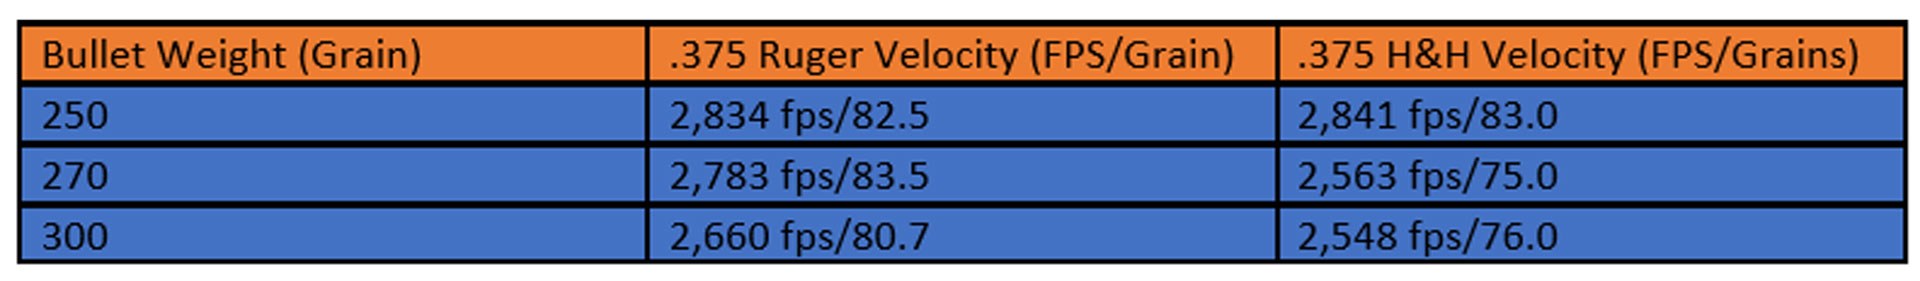 Bullet weight velocity table